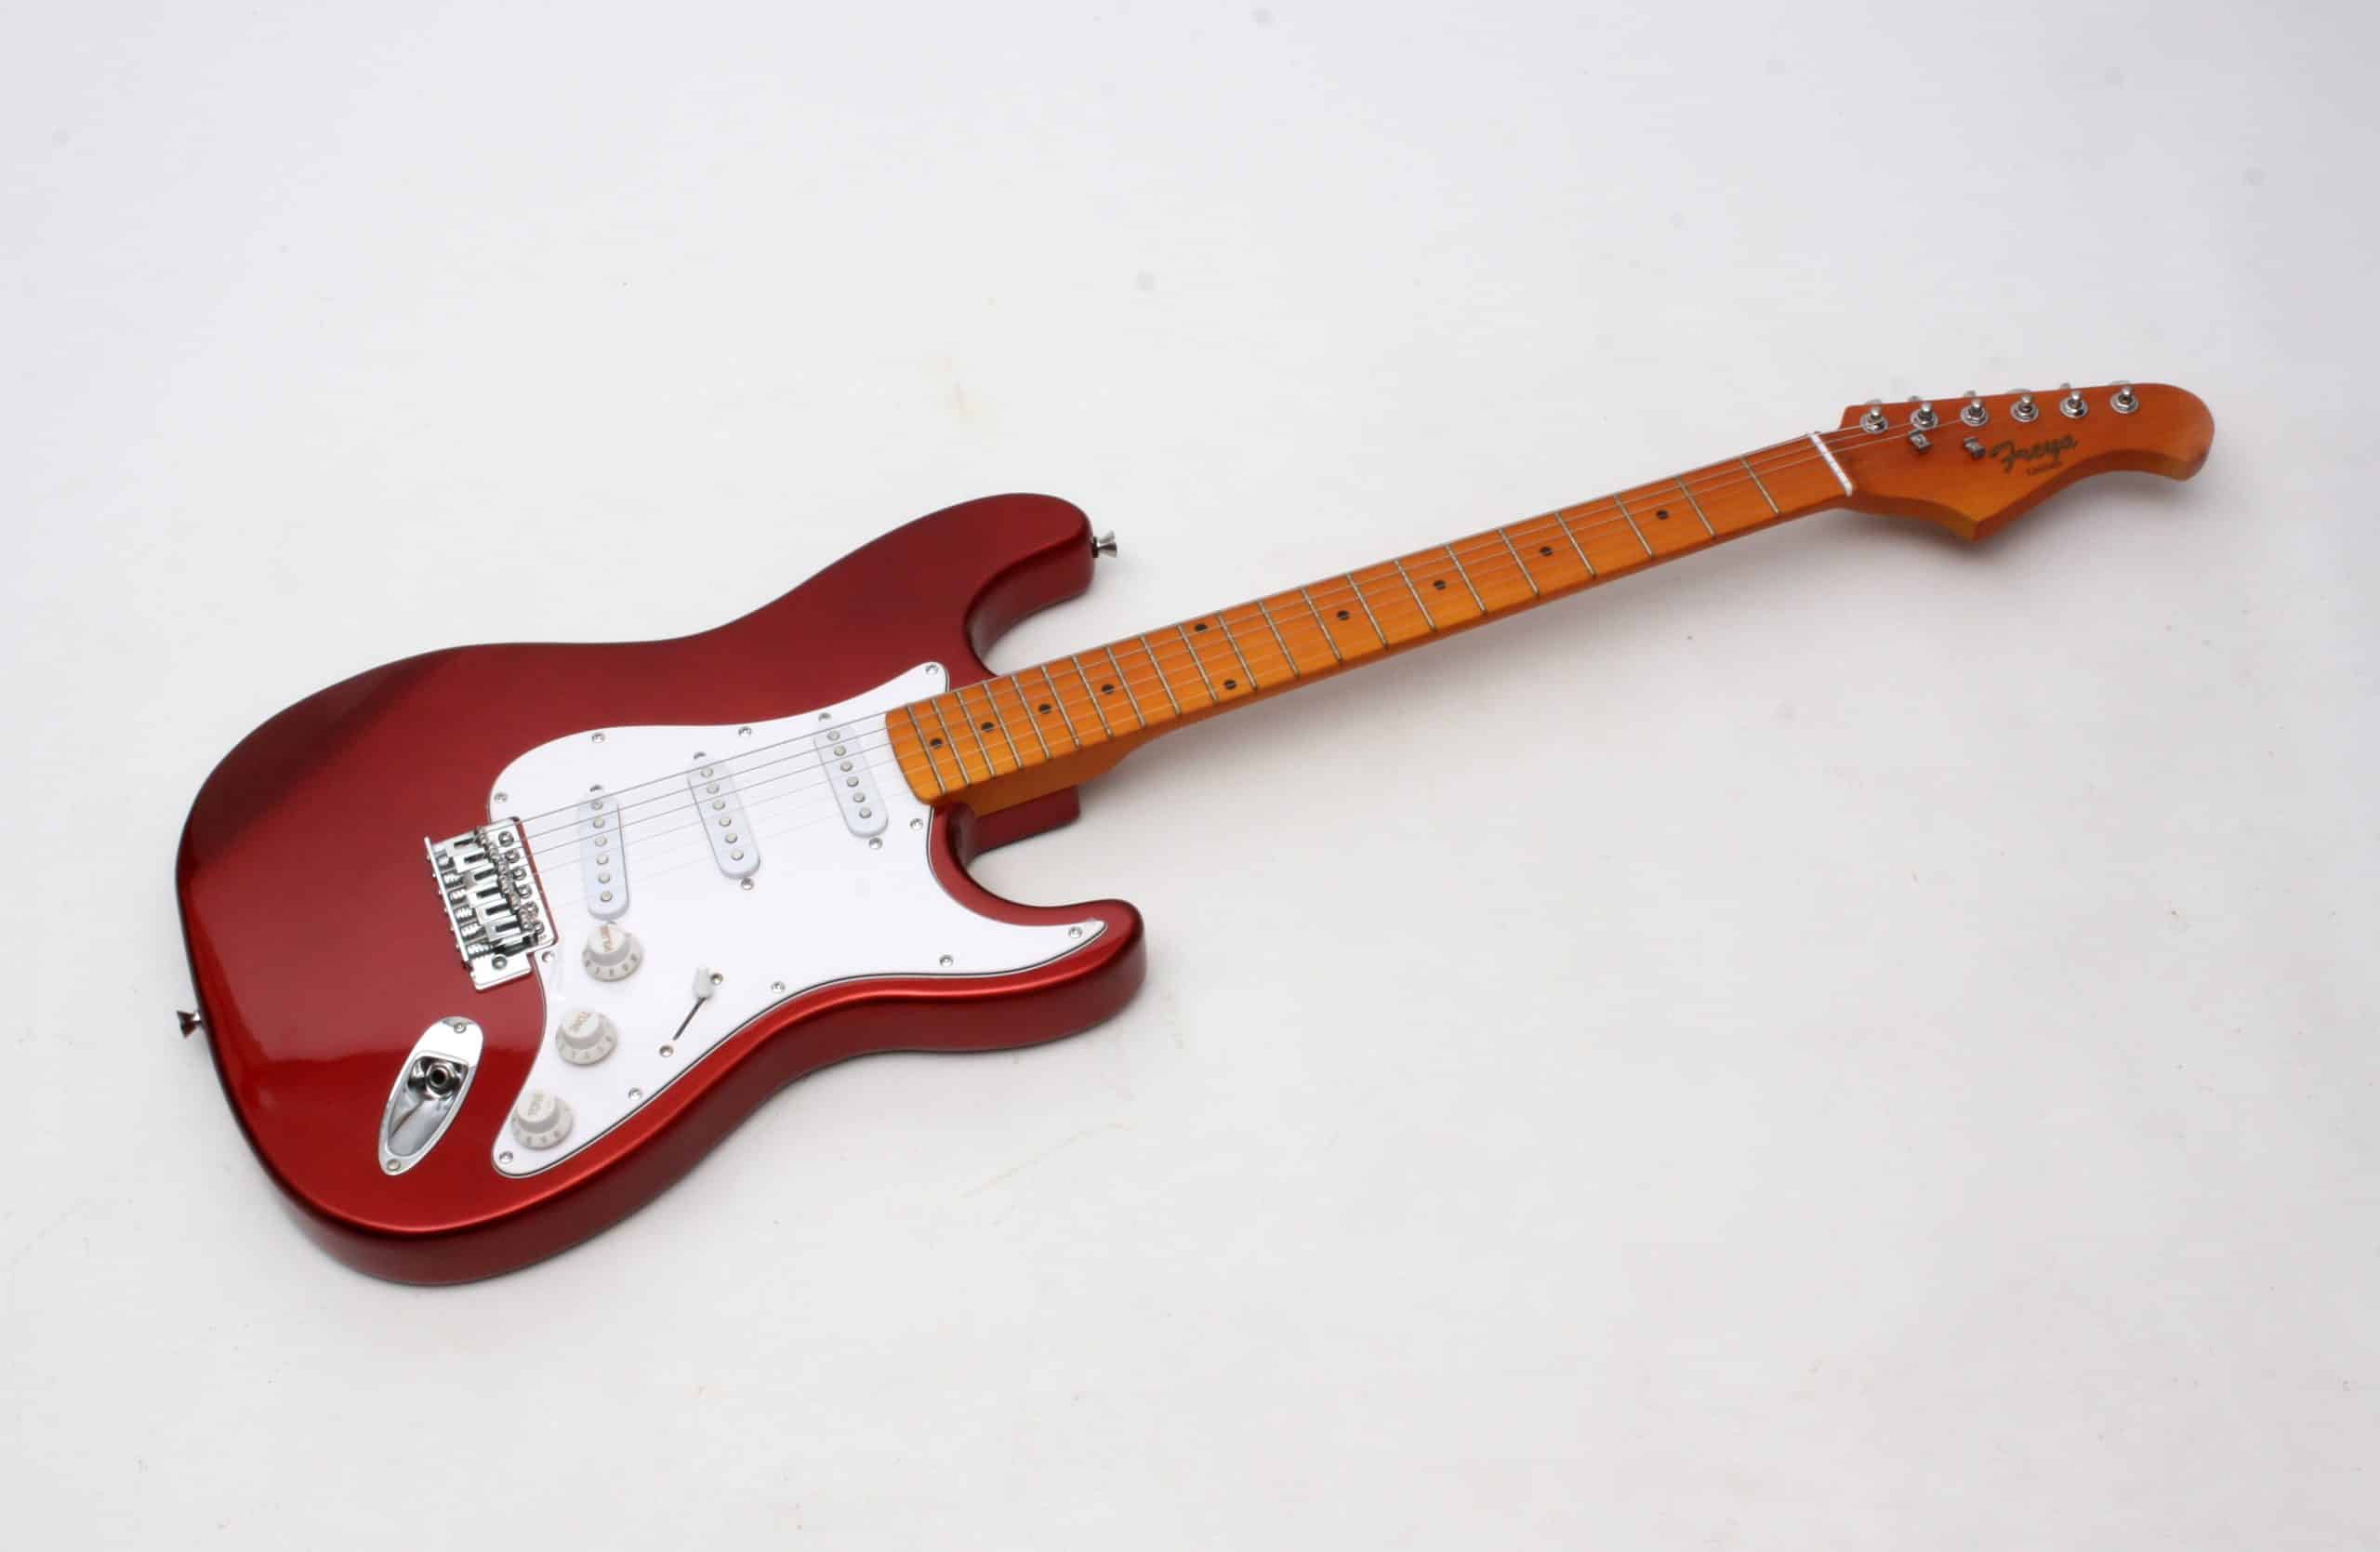 https://www.freyaguitars.ie/wp-content/uploads/2022/04/Strat-style-electric-guitar-candy-apple-red-SSS-60s-scaled.jpg